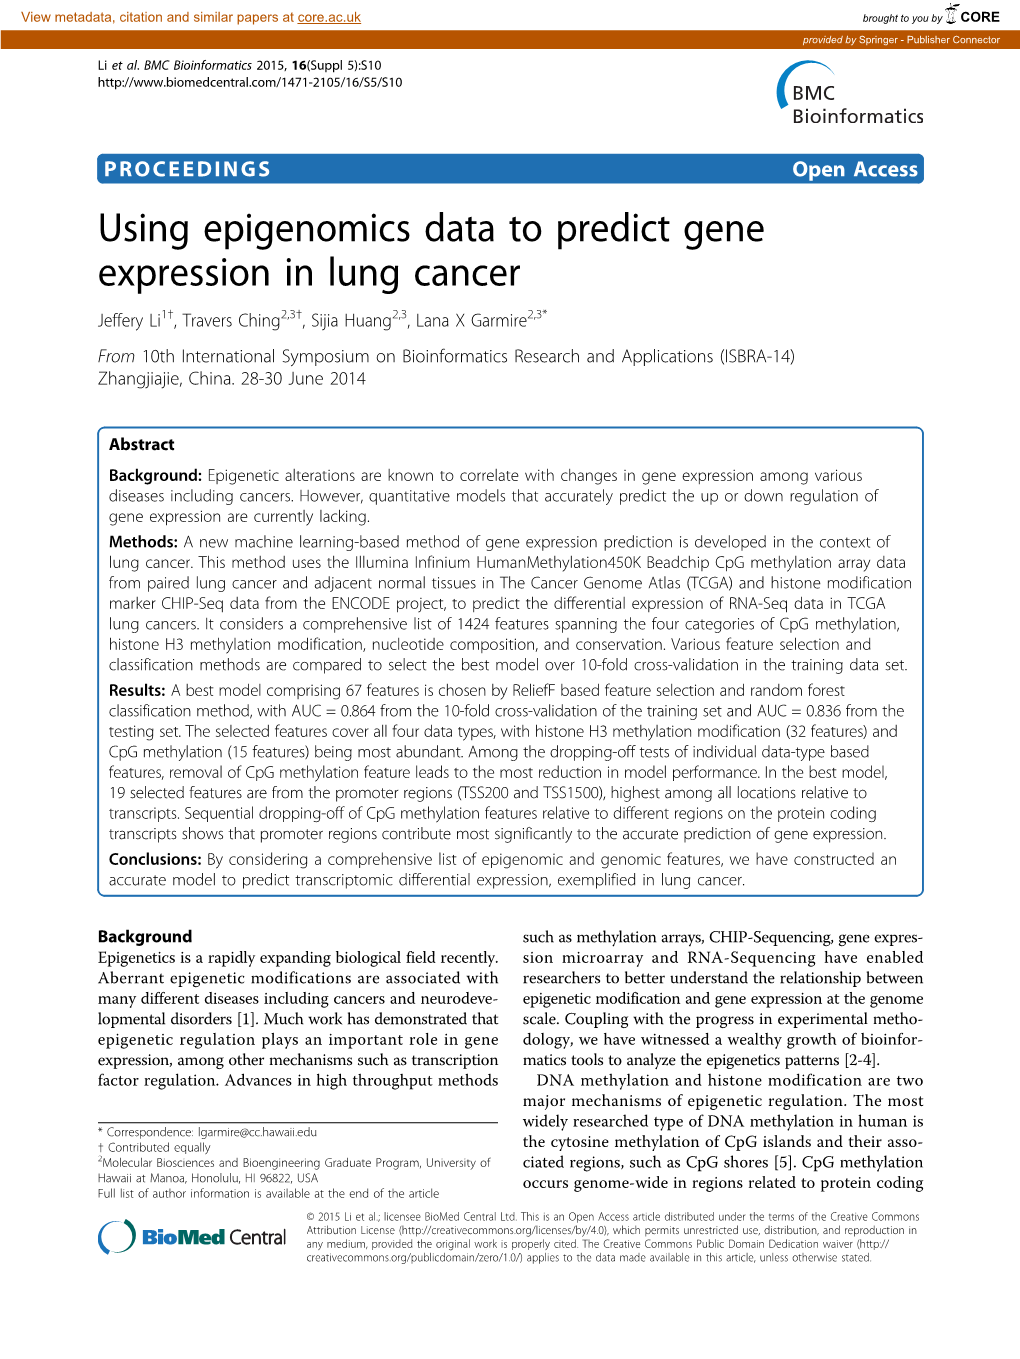 Using Epigenomics Data to Predict Gene Expression in Lung Cancer